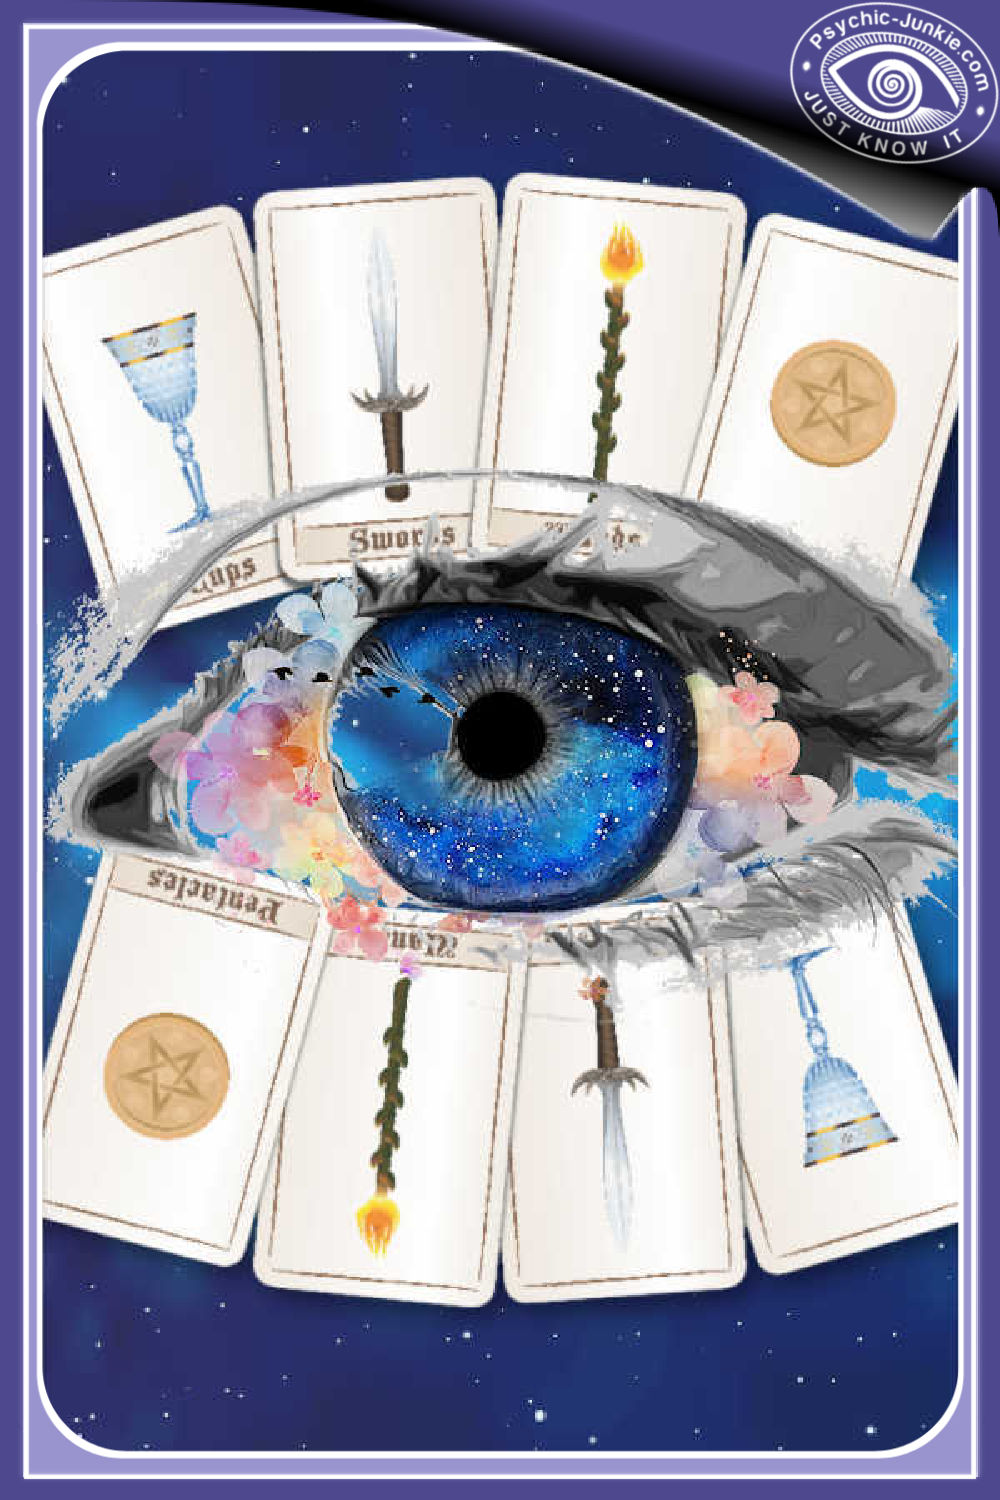 How Do Tarot Readers Know What They See In The Cards?